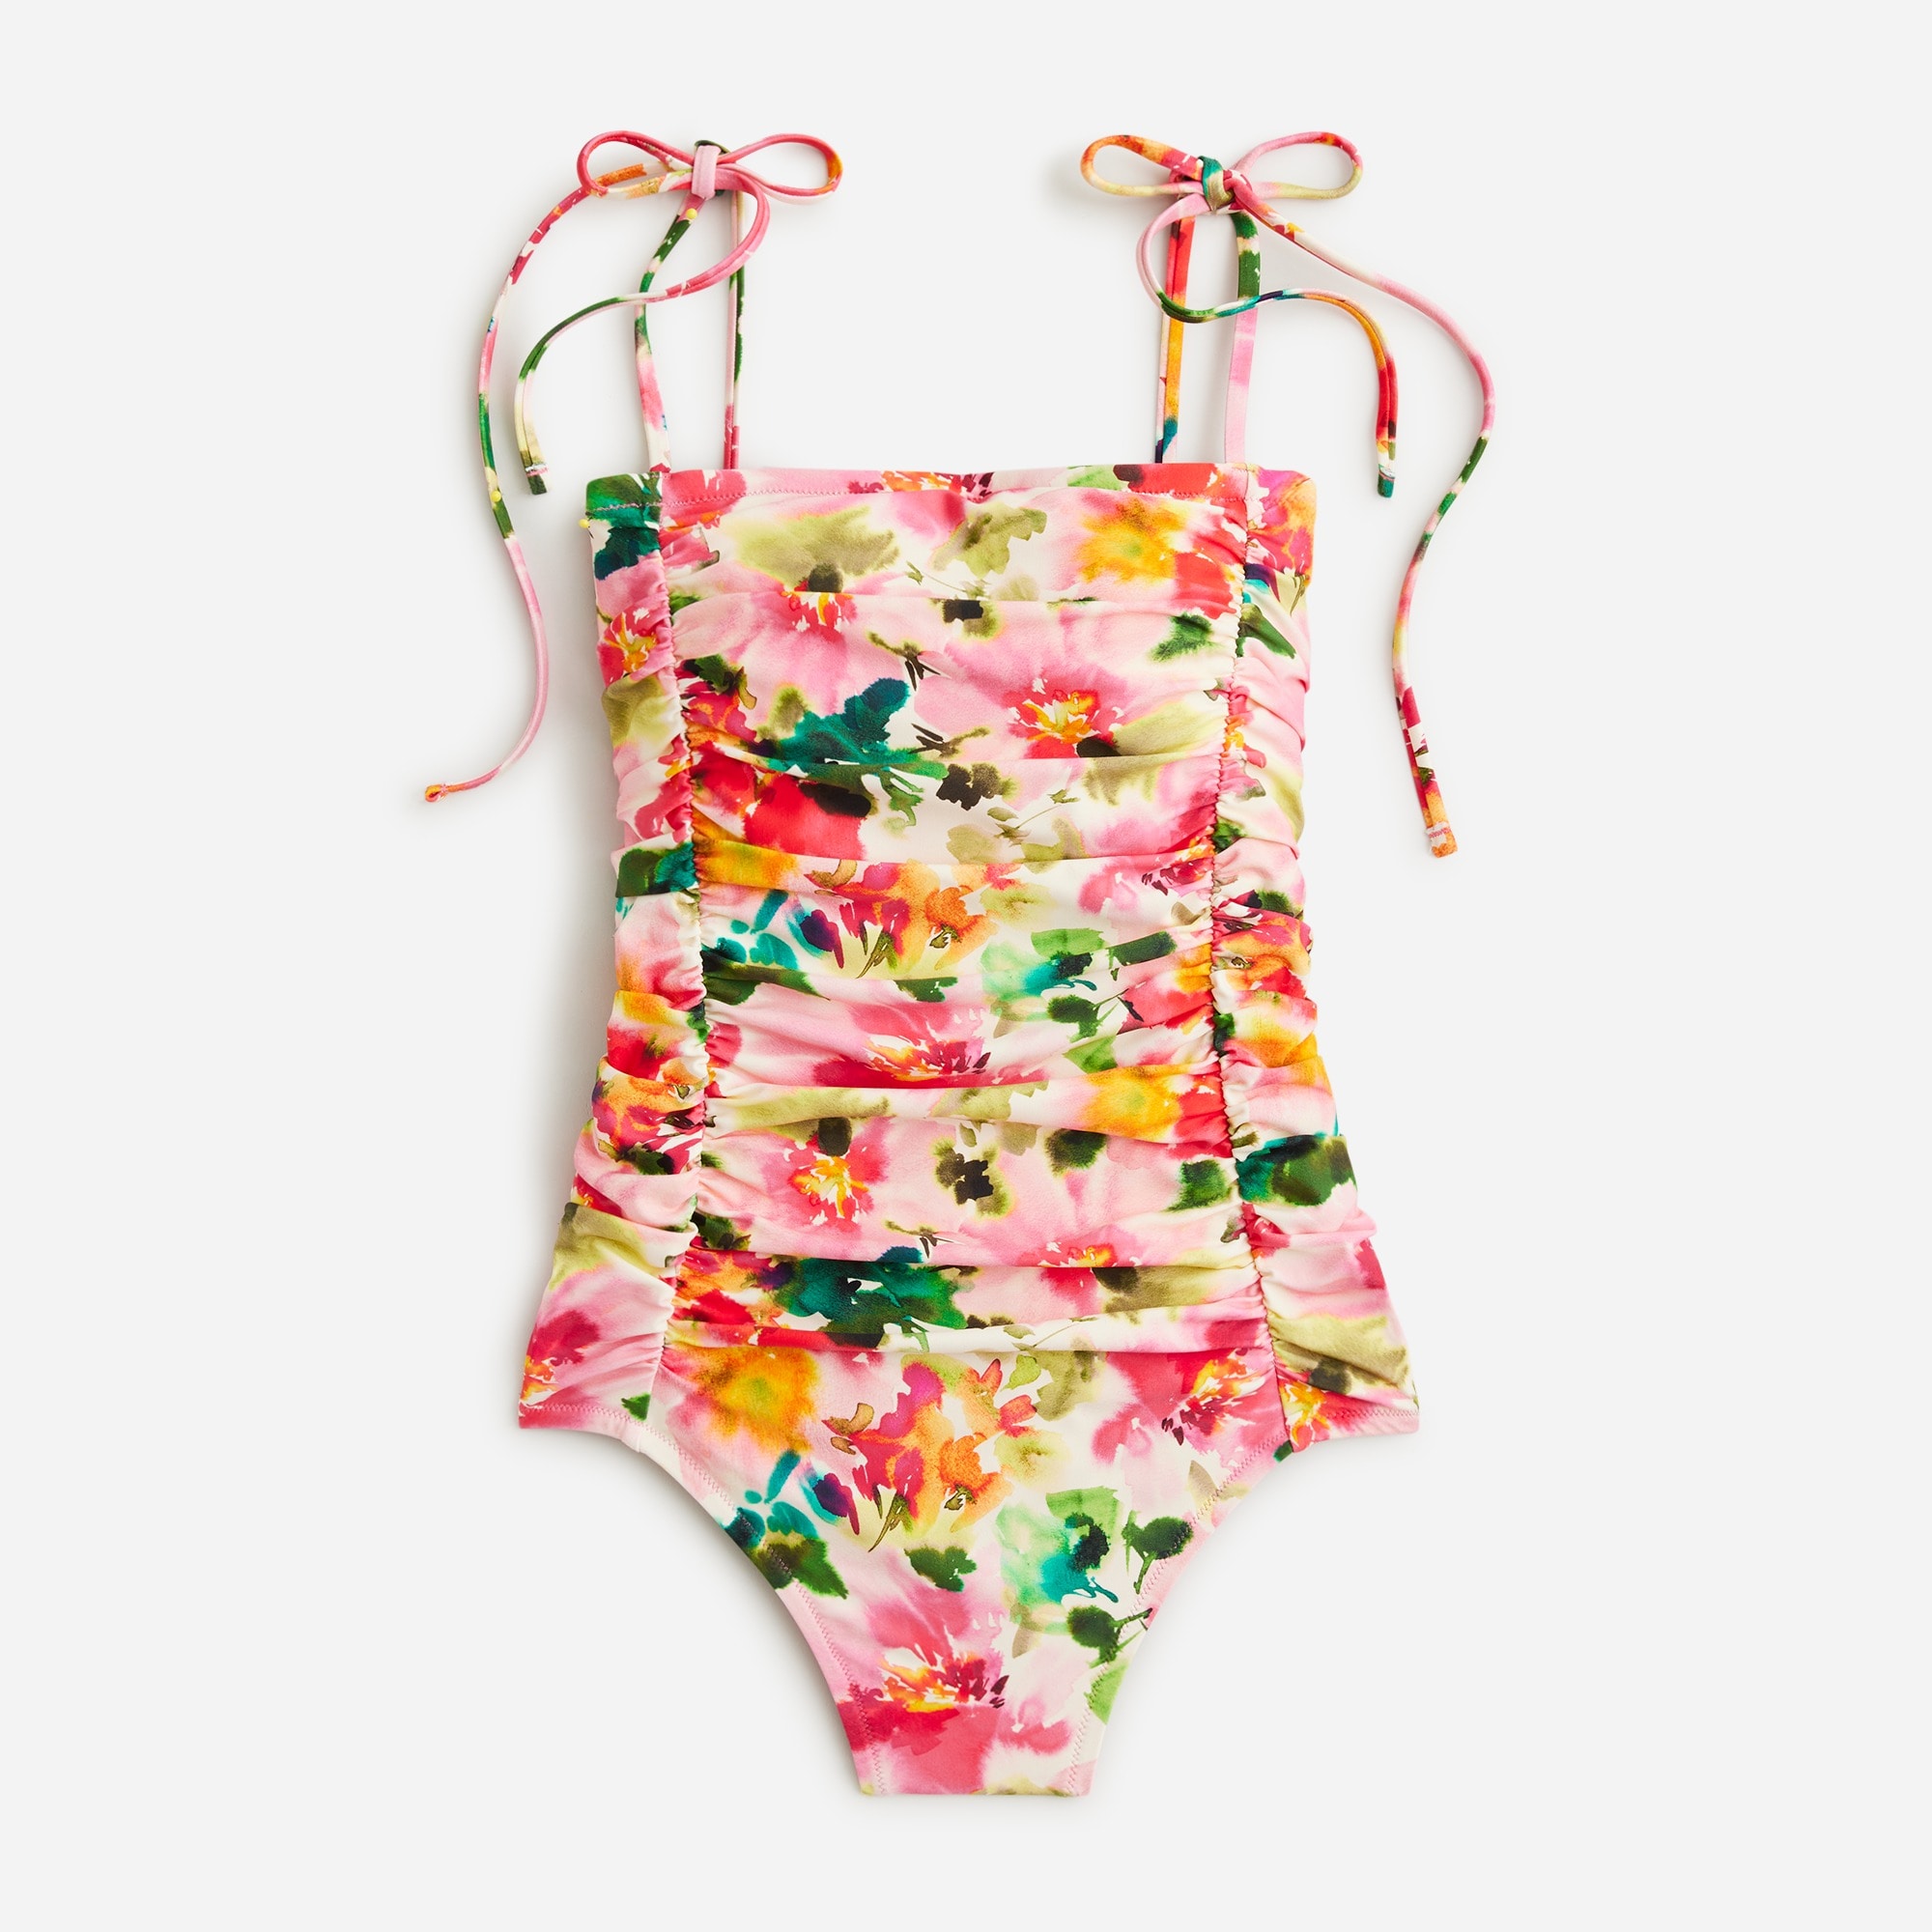  Ruched tie-shoulder one-piece swimsuit in floral